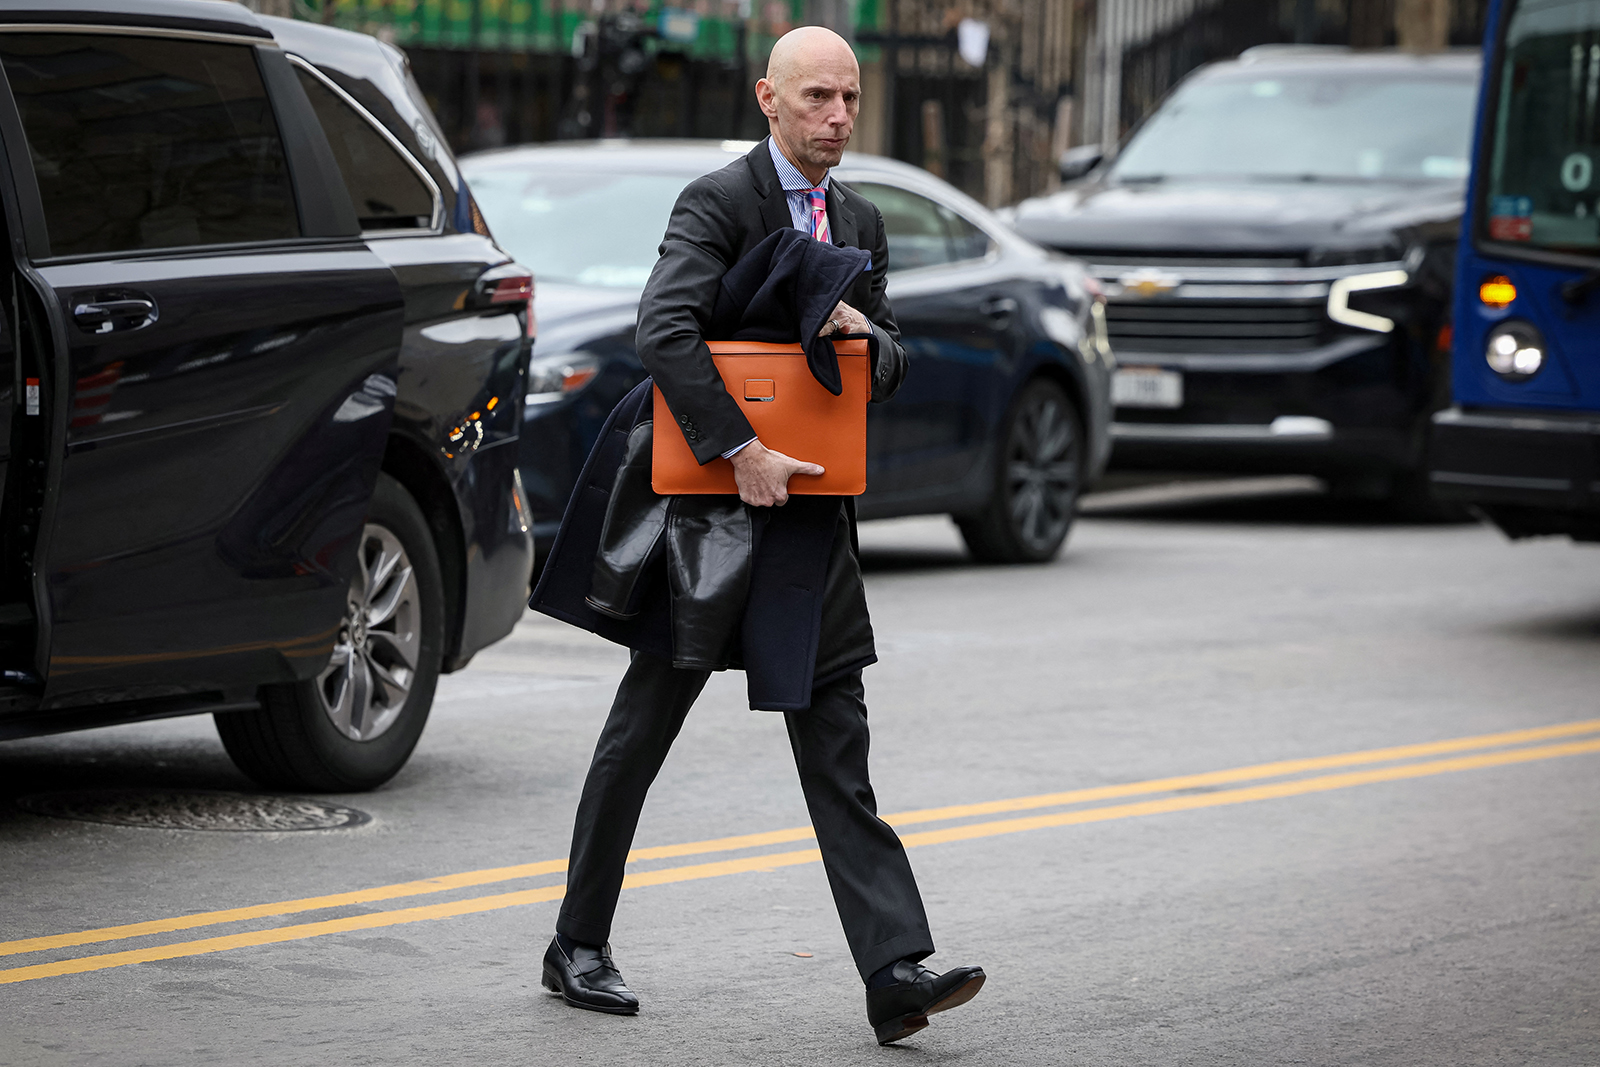 Attorney Marc Mukasey, defense lawyer for Sam Bankman-Fried, arriving for a hearing at the Manhattan Federal Courthouse in New York City on February 21.